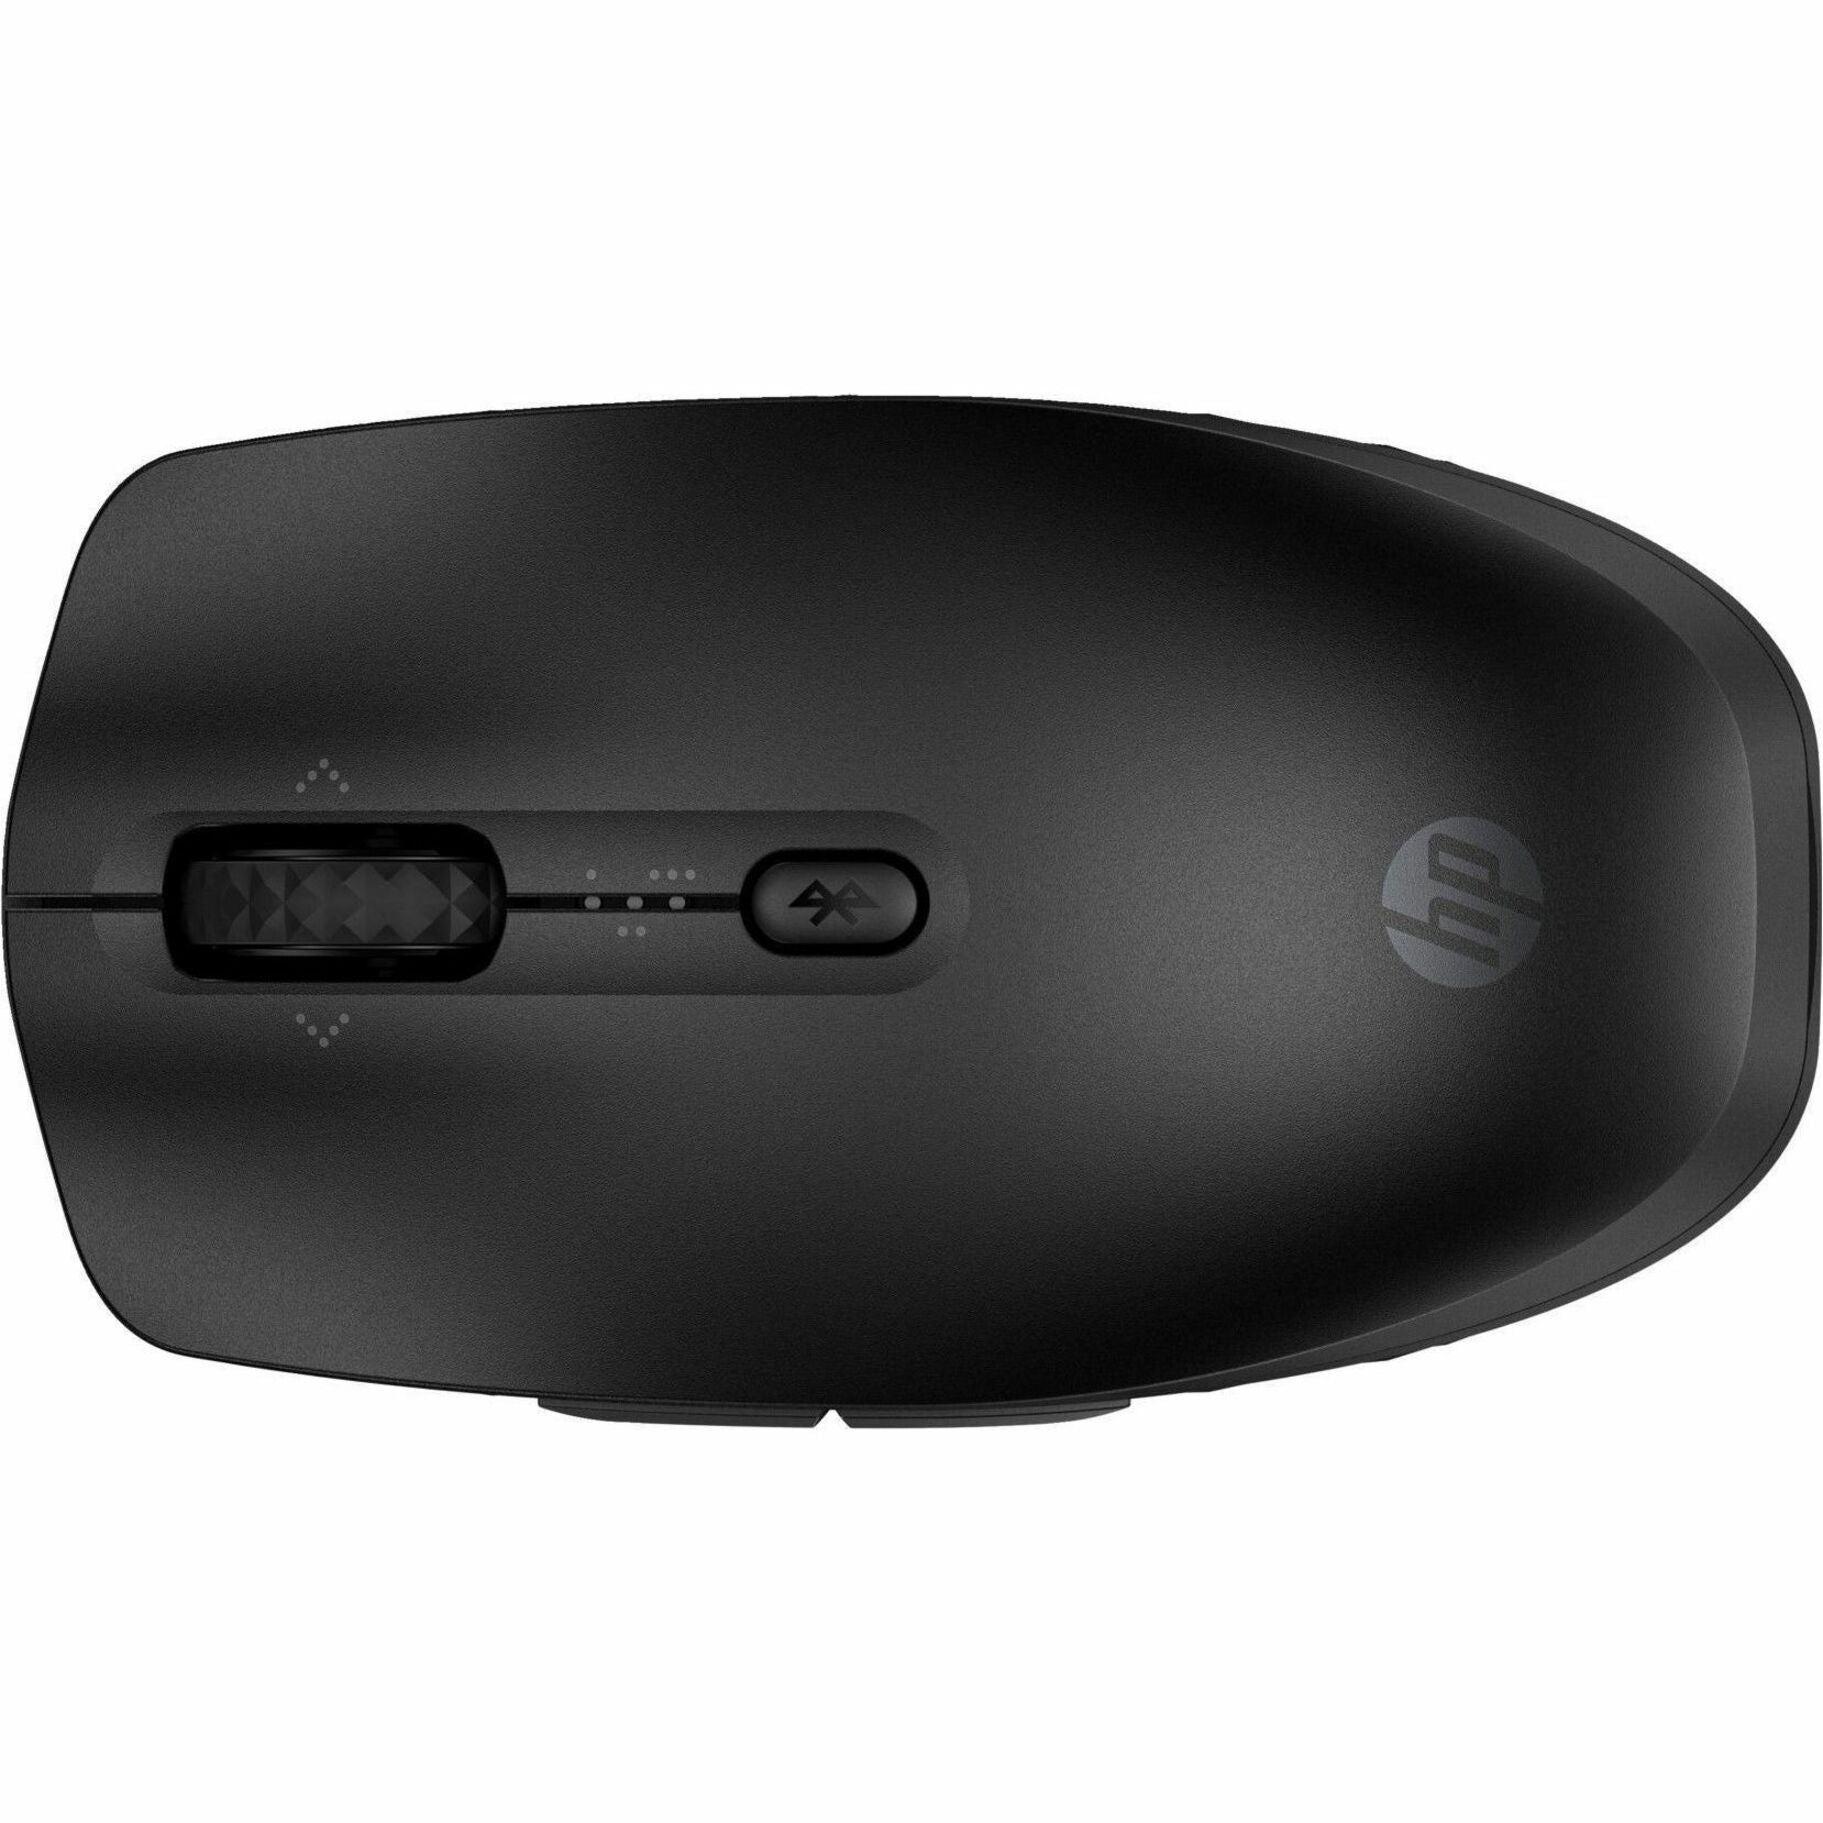 HP 425 Souris Bluetooth sans fil 7 boutons roue inclinable 4000 dpi